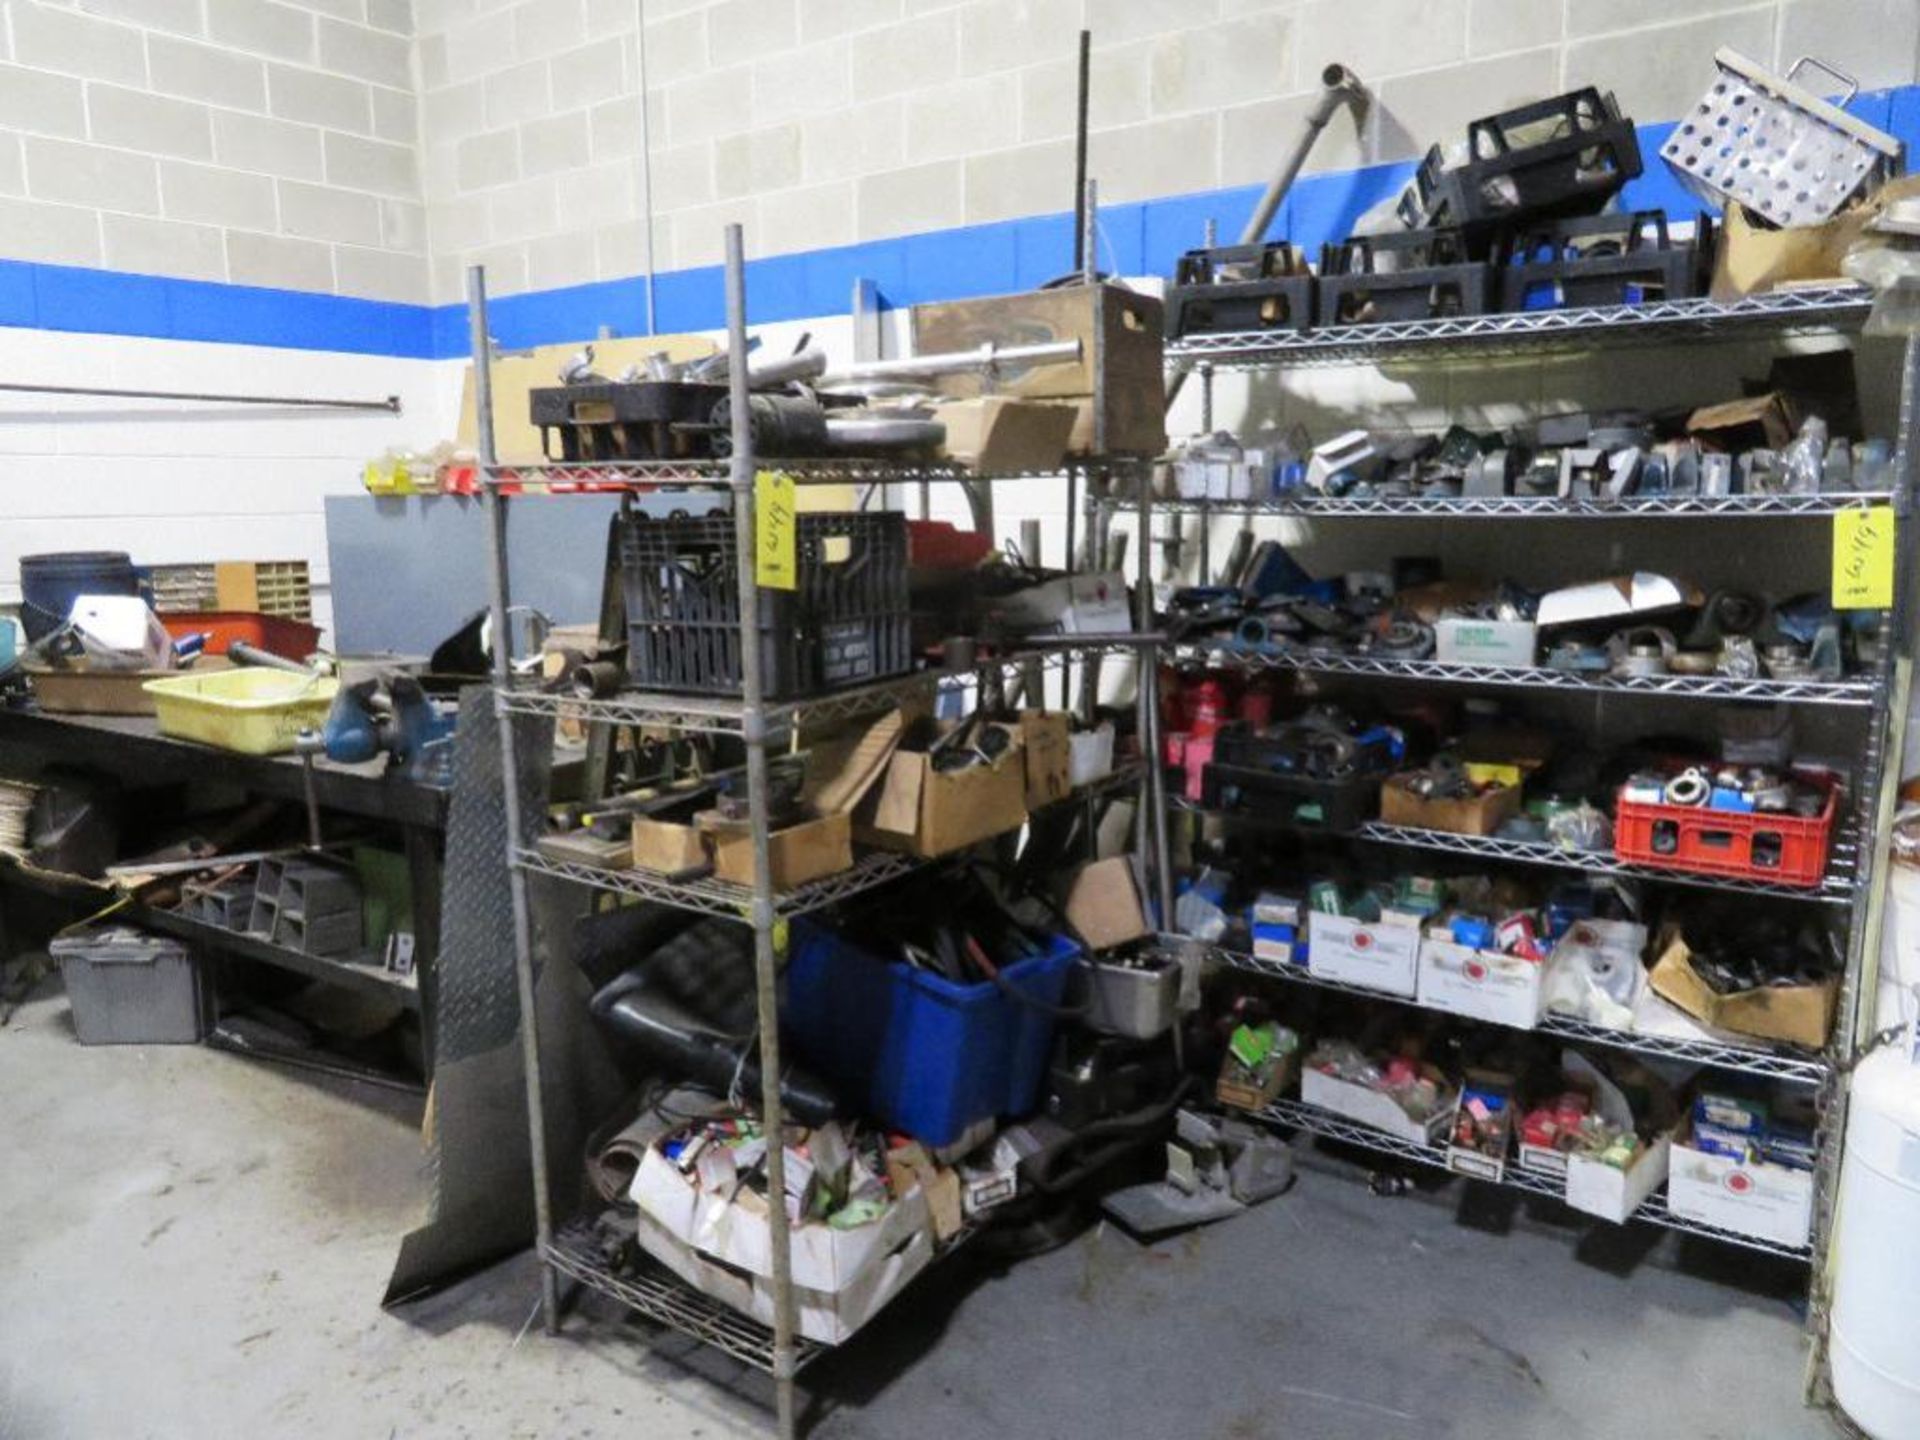 LOT: 48 in. x 96 in. Steel Table with Vise & Shelving Units with Contents of Conveyor Parts, Bearing